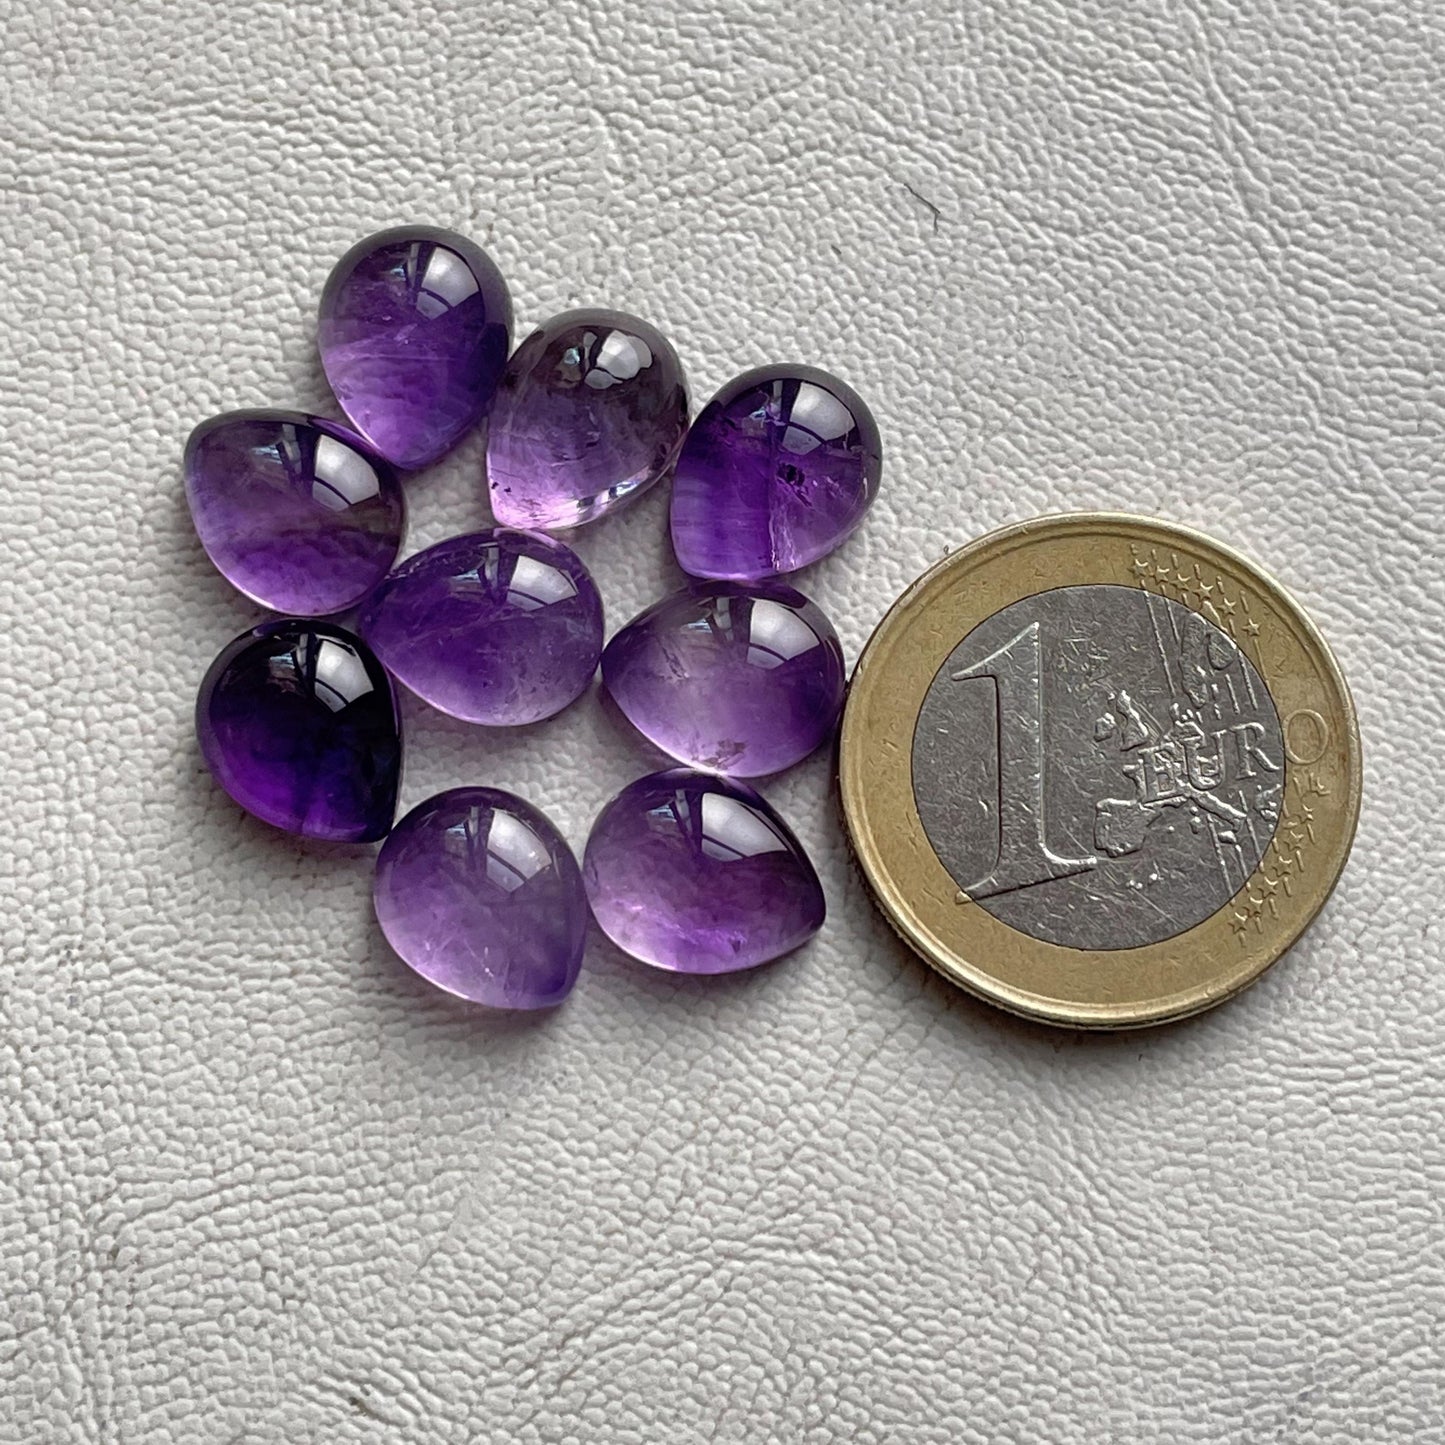 Gorgeous Purple Amethyst 9x11 mm Pear Cabochon (Natural)